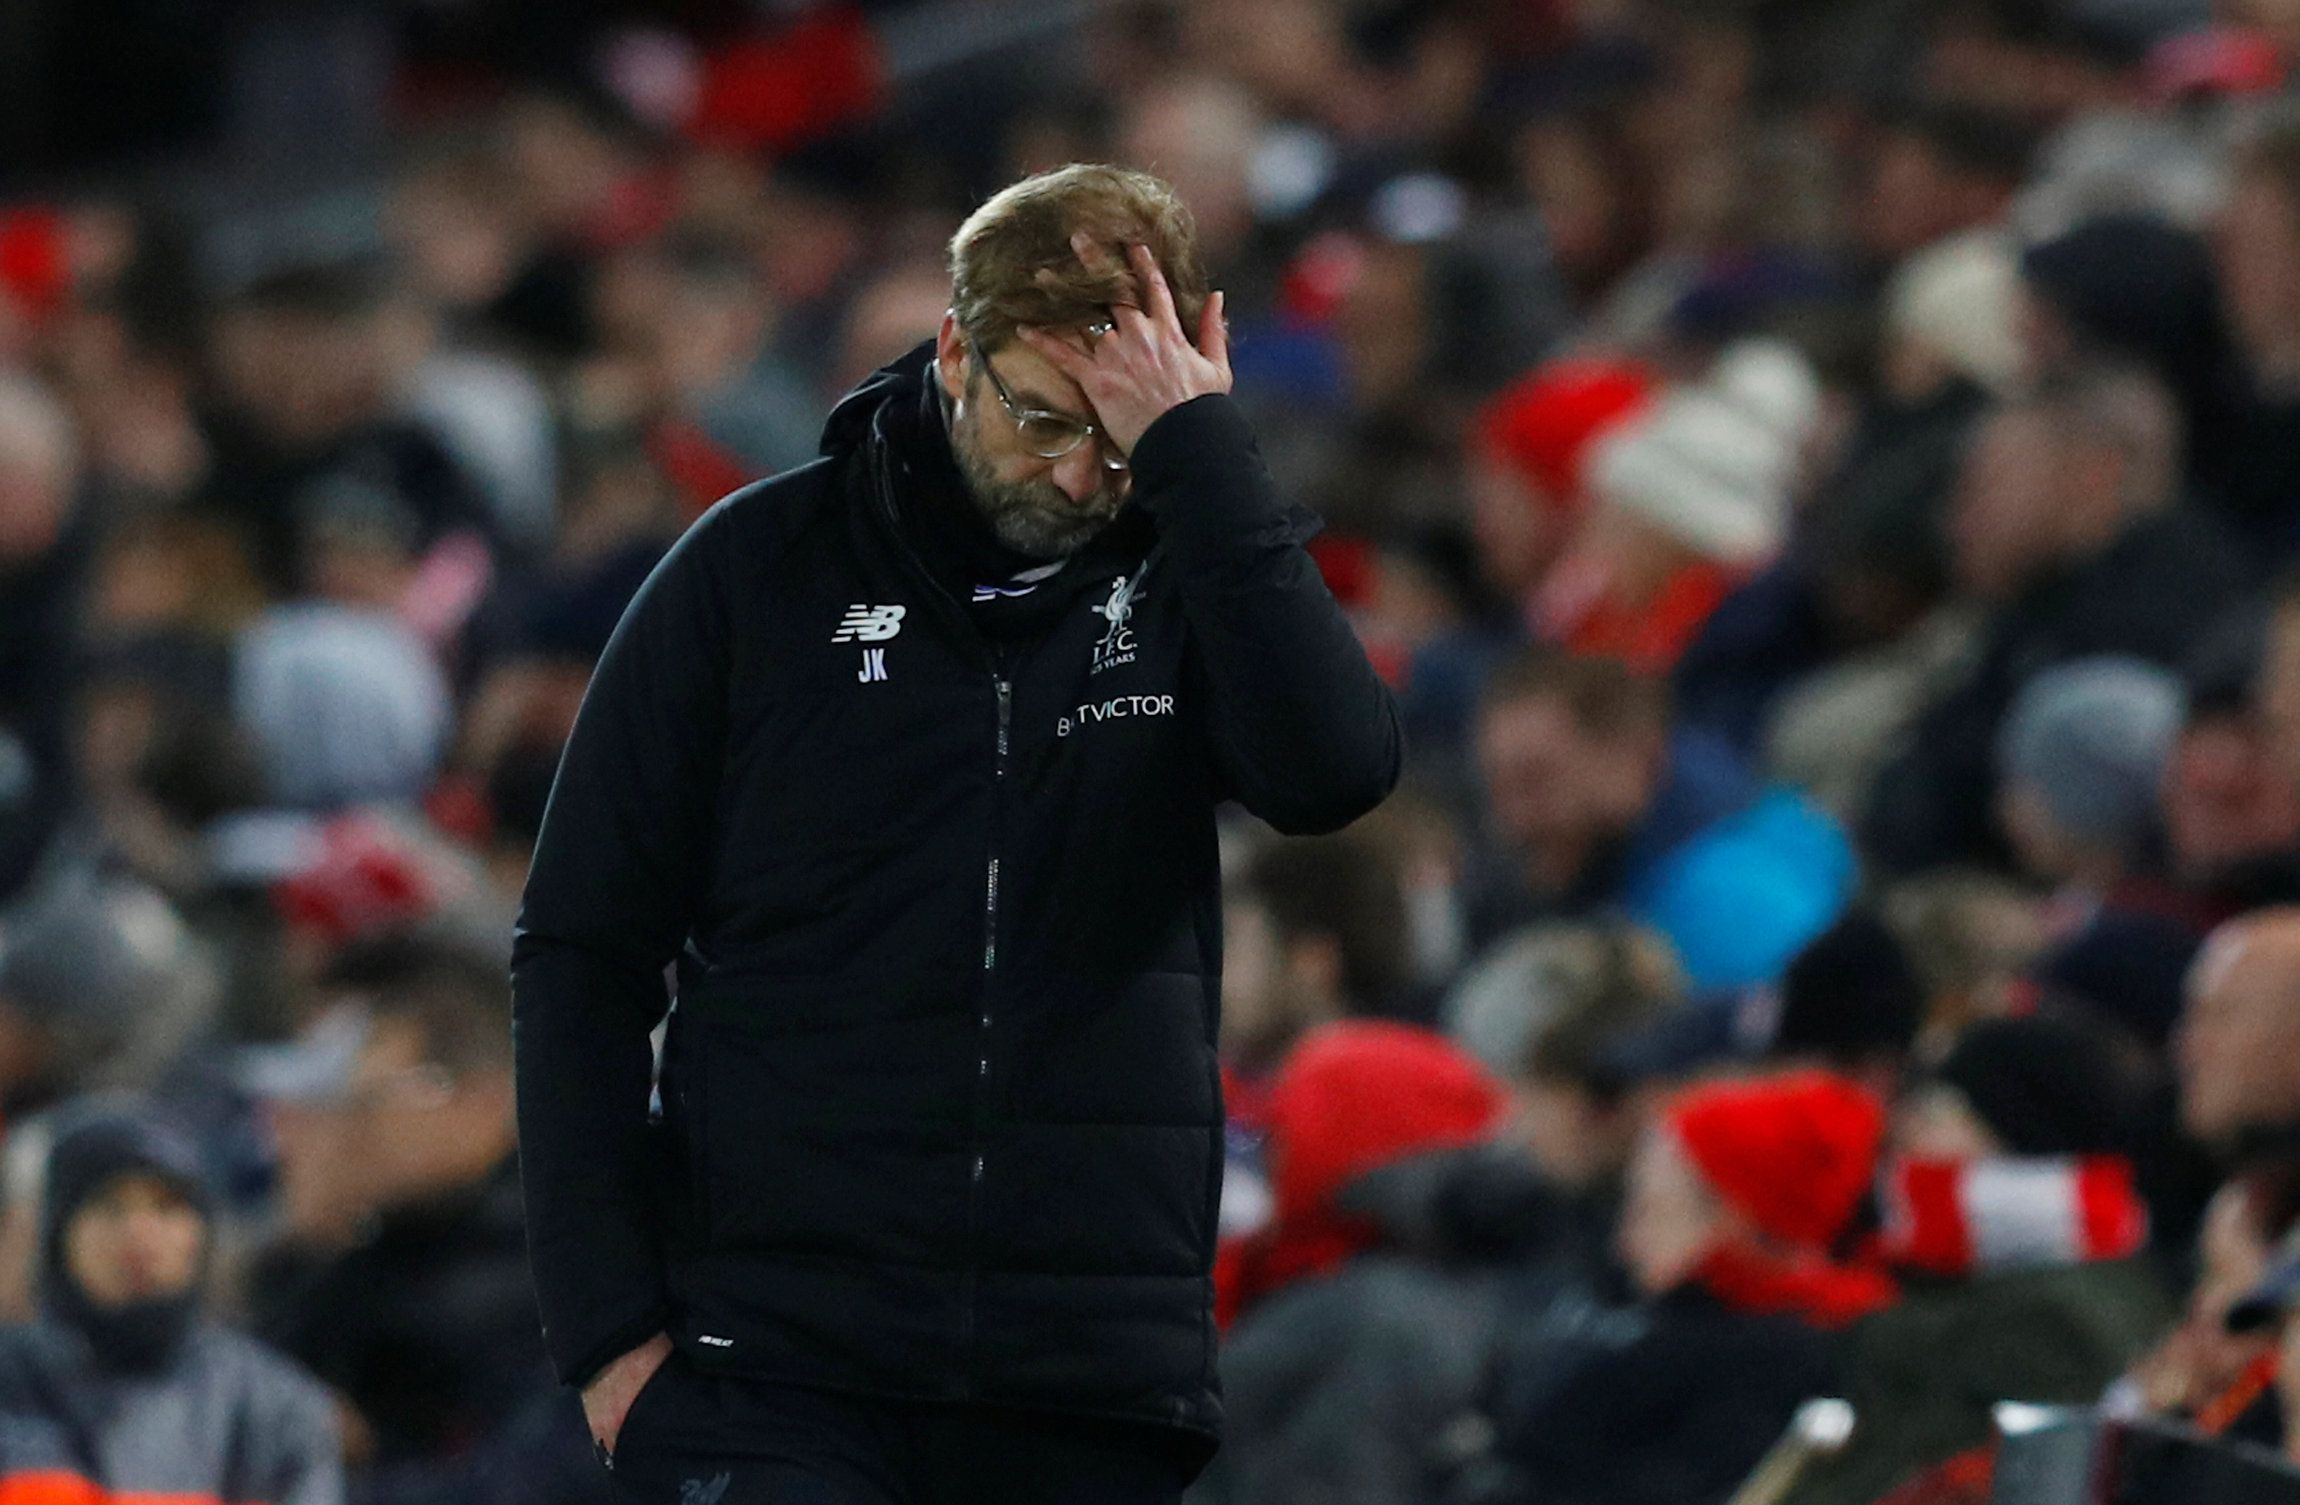 Soccer Football - FA Cup Fourth Round - Liverpool vs West Bromwich Albion - Anfield, Liverpool, Britain - January 27, 2018   Liverpool manager Juergen Klopp reacts   REUTERS/Phil Noble